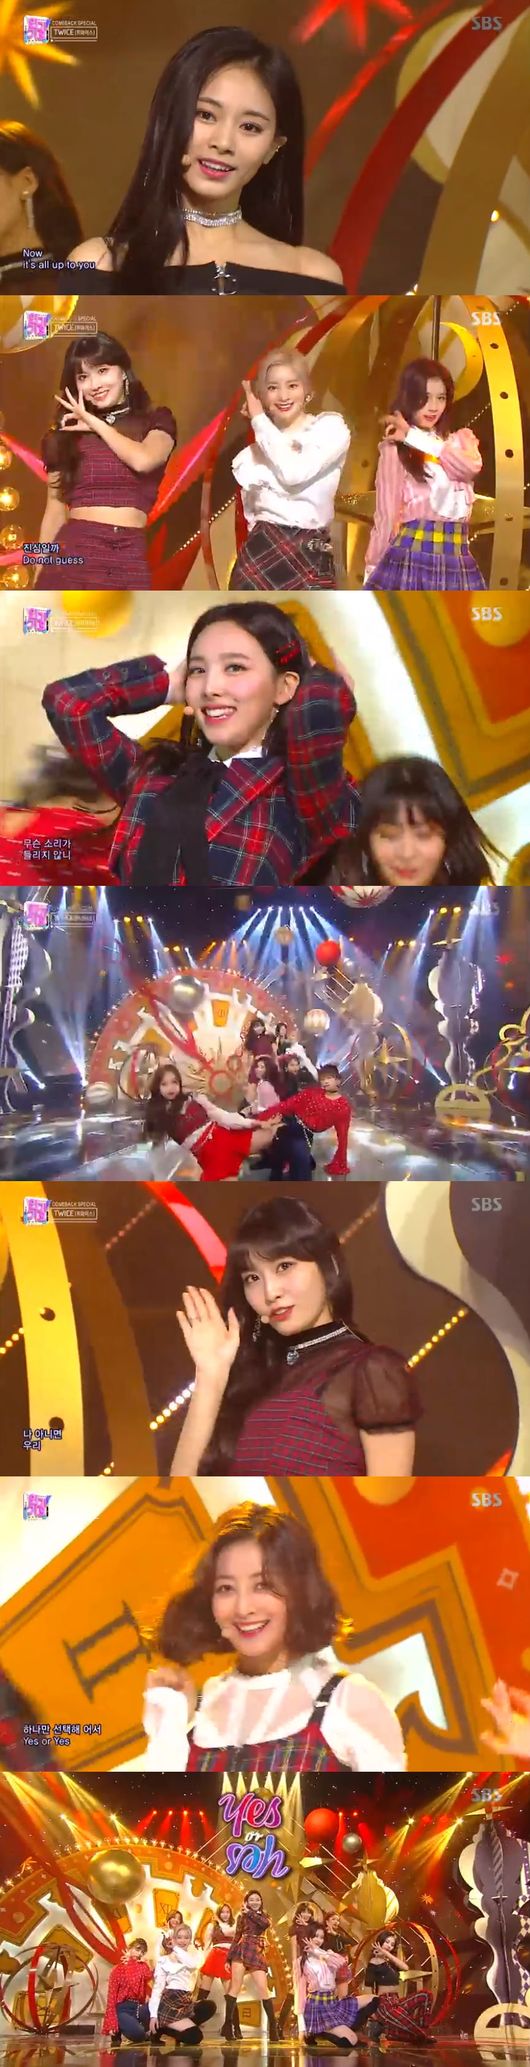 .EXO and TWICE comeback + IZWON debutPaul Kim Inkigayo first placetook the place.In SBS Inkigayo broadcasted on the afternoon of the 11th, EXOs Tempo, Paul Kims Meet You, and Izwons Ravian RoseHe was nominated and competed fiercely.On the day of the broadcast, a comeback crisis was held in November, showing Daejeon at a glance.First, EXO showed two stages, The Moment to Come and Tempo.EXO, who was unable to take his eyes off the sexy mood on the stage of the Accessful Moment, which was prepared for the comeback week first, enjoyed the eyes and ears of music fans with the beat and charisma that could not stop at Tempo.TWICE returned to its lovely Answer: First, it showed a refreshing charm with its Korean version of BDZ.The song that contains the charm of TWICE with the dignified lyrics that will break down the heart of the loved one and the plump melody.In the title song Yes or Yes, he came to the stage with a costume that gave him a point with a red check.K.Will set up a special stage with Call Your Mother. Sweet K.Wills voice shook her heart properly.In the title song Then, Dan created a stage that seemed to see a music video of Marge with a sad sensibility that matches the autumn sensibility.The thrilling debut stage also drew cheers from fans. Shiny Key presented the solo debut song Forever Yours featuring his best friend Soyou.As if representing youth, the refreshing Melody and the best friend Chemie, who is presented by Key and Soyou, gave a pleasant excitement.Aizwon is the first place with Ravian RoseWith the nomination, Inkigayo successfully completed the music broadcasting stage of the first week of debut.On this day, IZWON, who was on stage in white and black costume, showed the best debut stage with performance that fits with natural stage manners.The ball team presented a special comeback stage. It was a sophisticated and dreamy stage with Be Myself. It showed its charming charm with the title song Not That Type.The costume that gave the red point gave a strong impression, and the powerful performance and the addicted song that captivated both men and women captivated both eyes and ears.Chae-yeon made a comeback after three and a half years, and she still performed her dance performance with her new song See Jaya. She announced the return of the autumn dancing queen with a point-filled dance with an added chorus.In addition, Monster X showed its charismatic stage with Shoot Out, which swept the four domestic music broadcasts, and Stray Kids showed the popularity of a new person who is full of energy while being full of I am YOU.In addition, April, Wikimki, Golden Child, Sohee, Seven Clack, ATEEZ, Dream Note, and Park Sung Yeon have attracted the hearts of Inkigayo viewers.Capture the broadcast screen for Inkigayo.